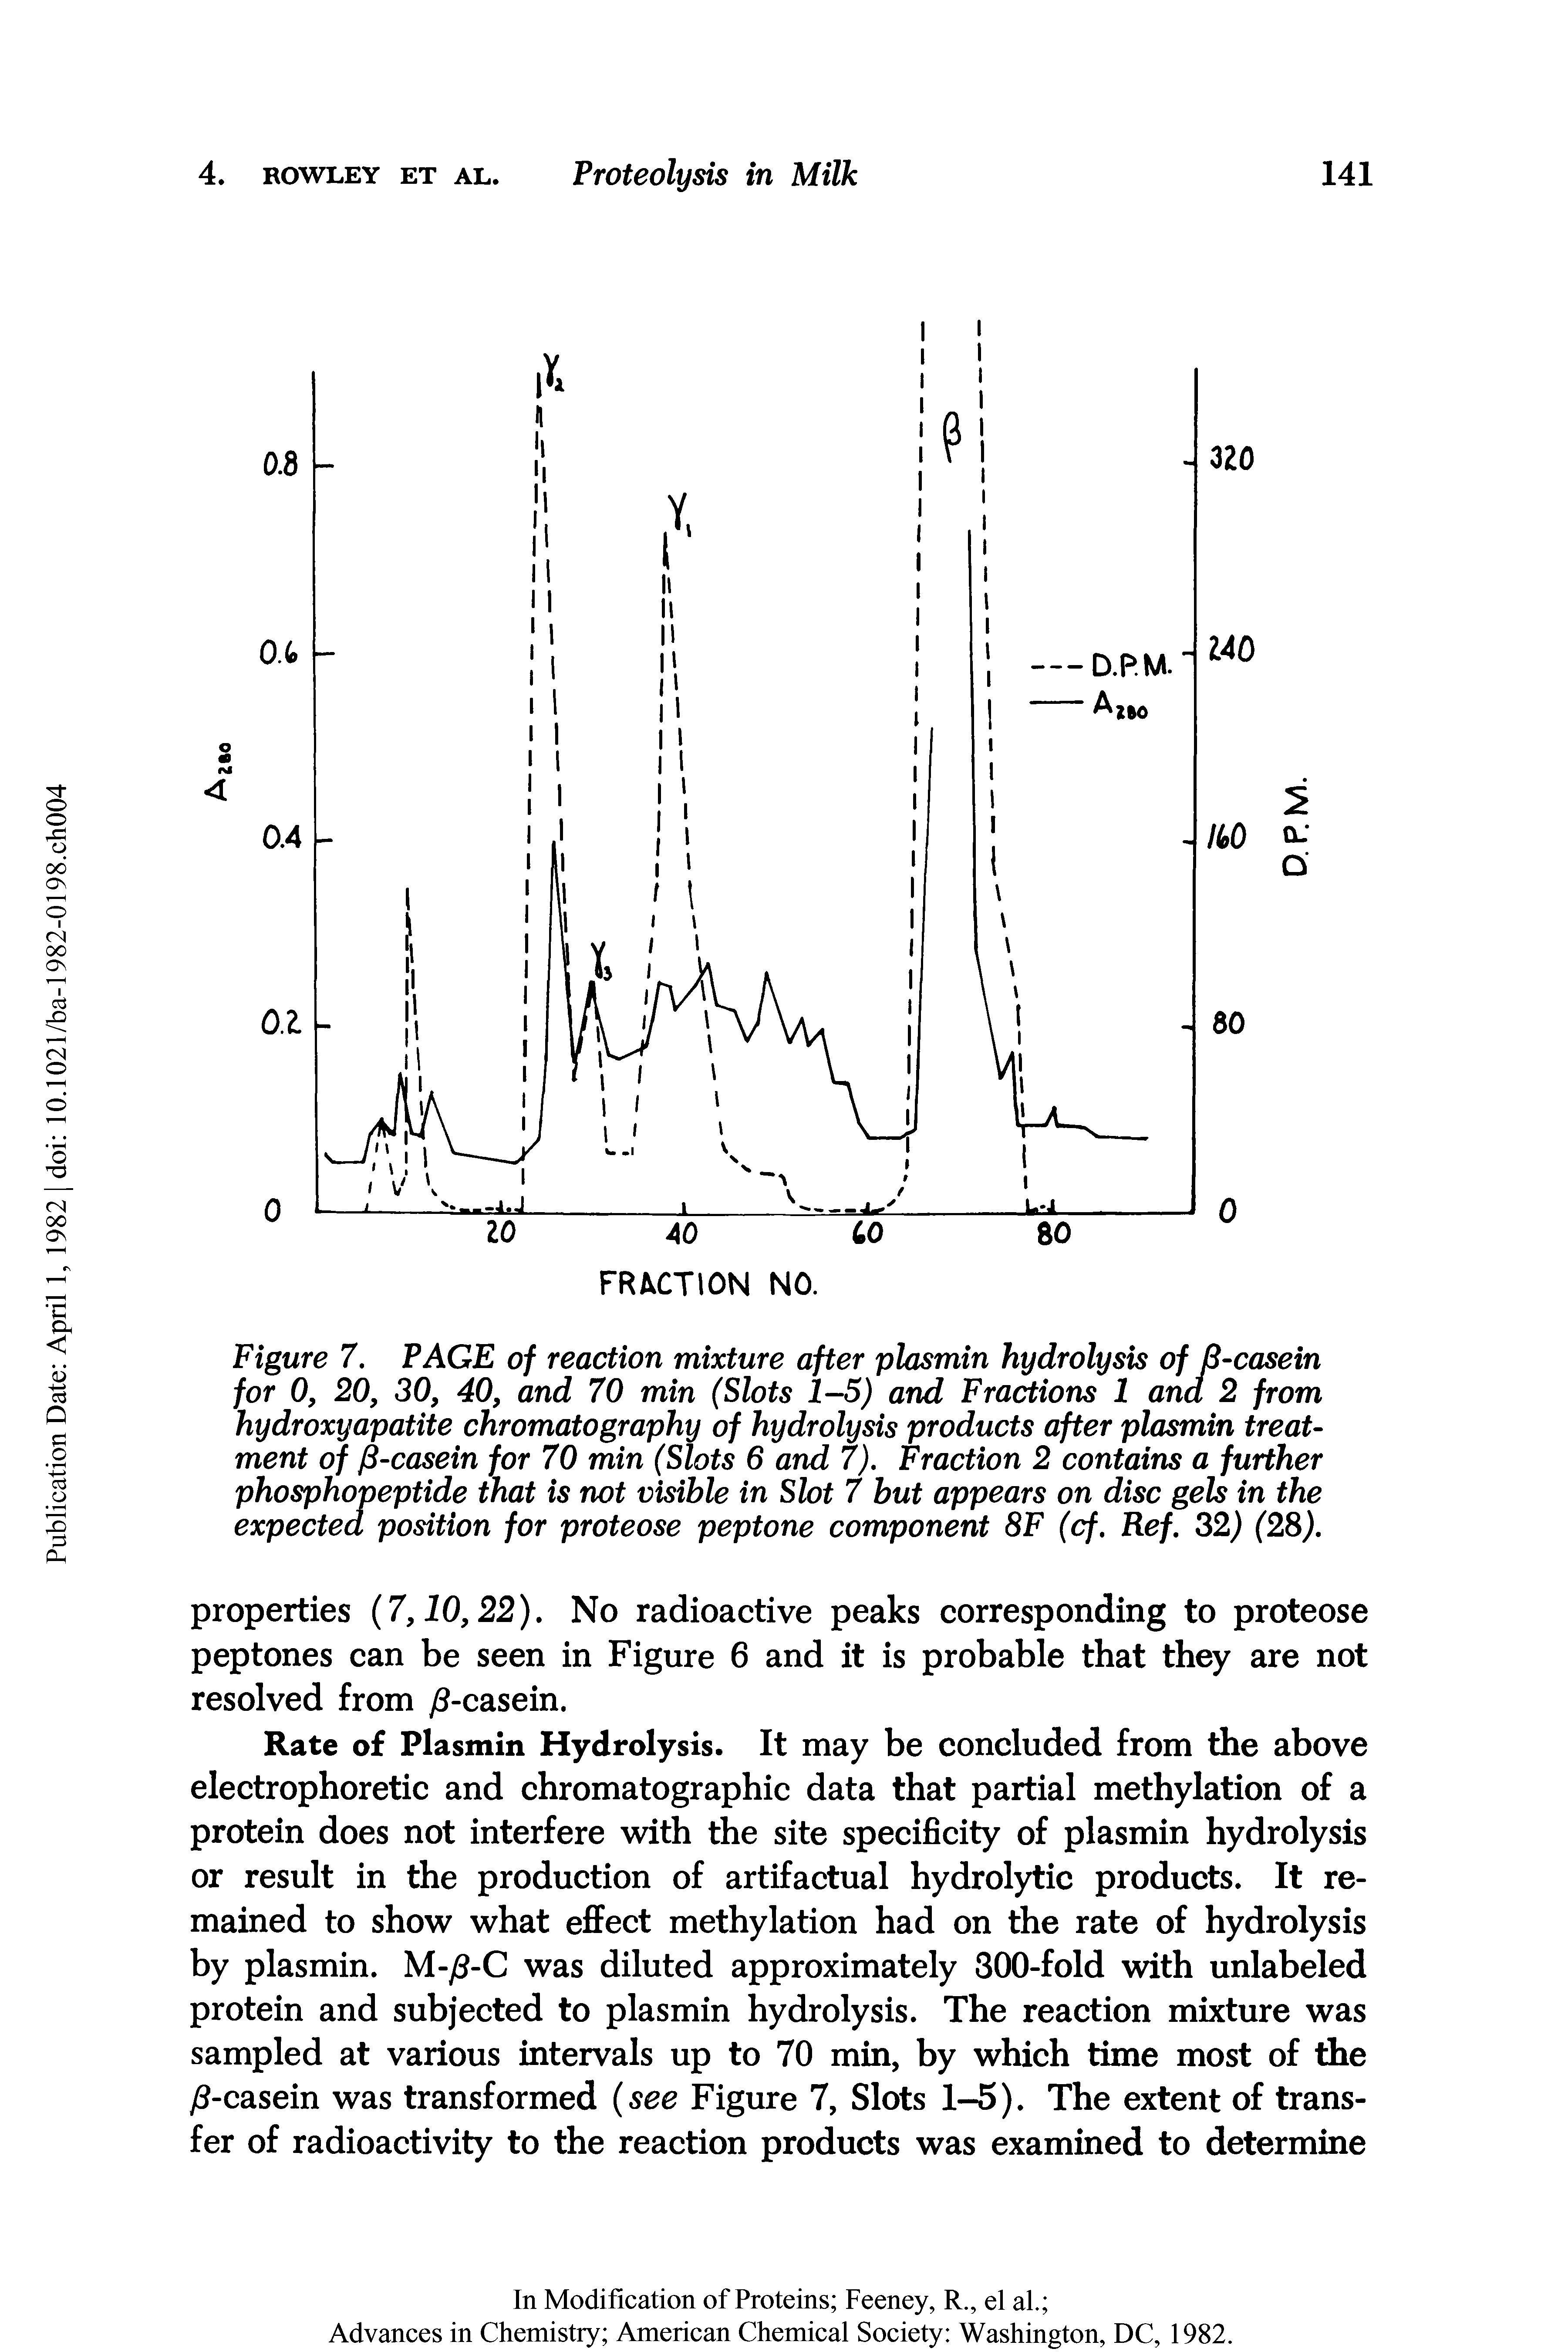 Figure 7. PAGE of reaction mixture after plasmin hydrolysis of B-casein for 0, 20, 30, 40, and 70 min (Slots 1-5) and Fractions 1 ana 2 from hydroxyapatite chromatography of hydrolysis products after plasmin treatment of fi-casein for 70 min (Slots 6 and 7). Fraction 2 contains a further phosphopeptide that is not visible in Slot 7 but appears on disc gels in the expected position for proteose peptone component 8F (cf. Ref. 32) (28).